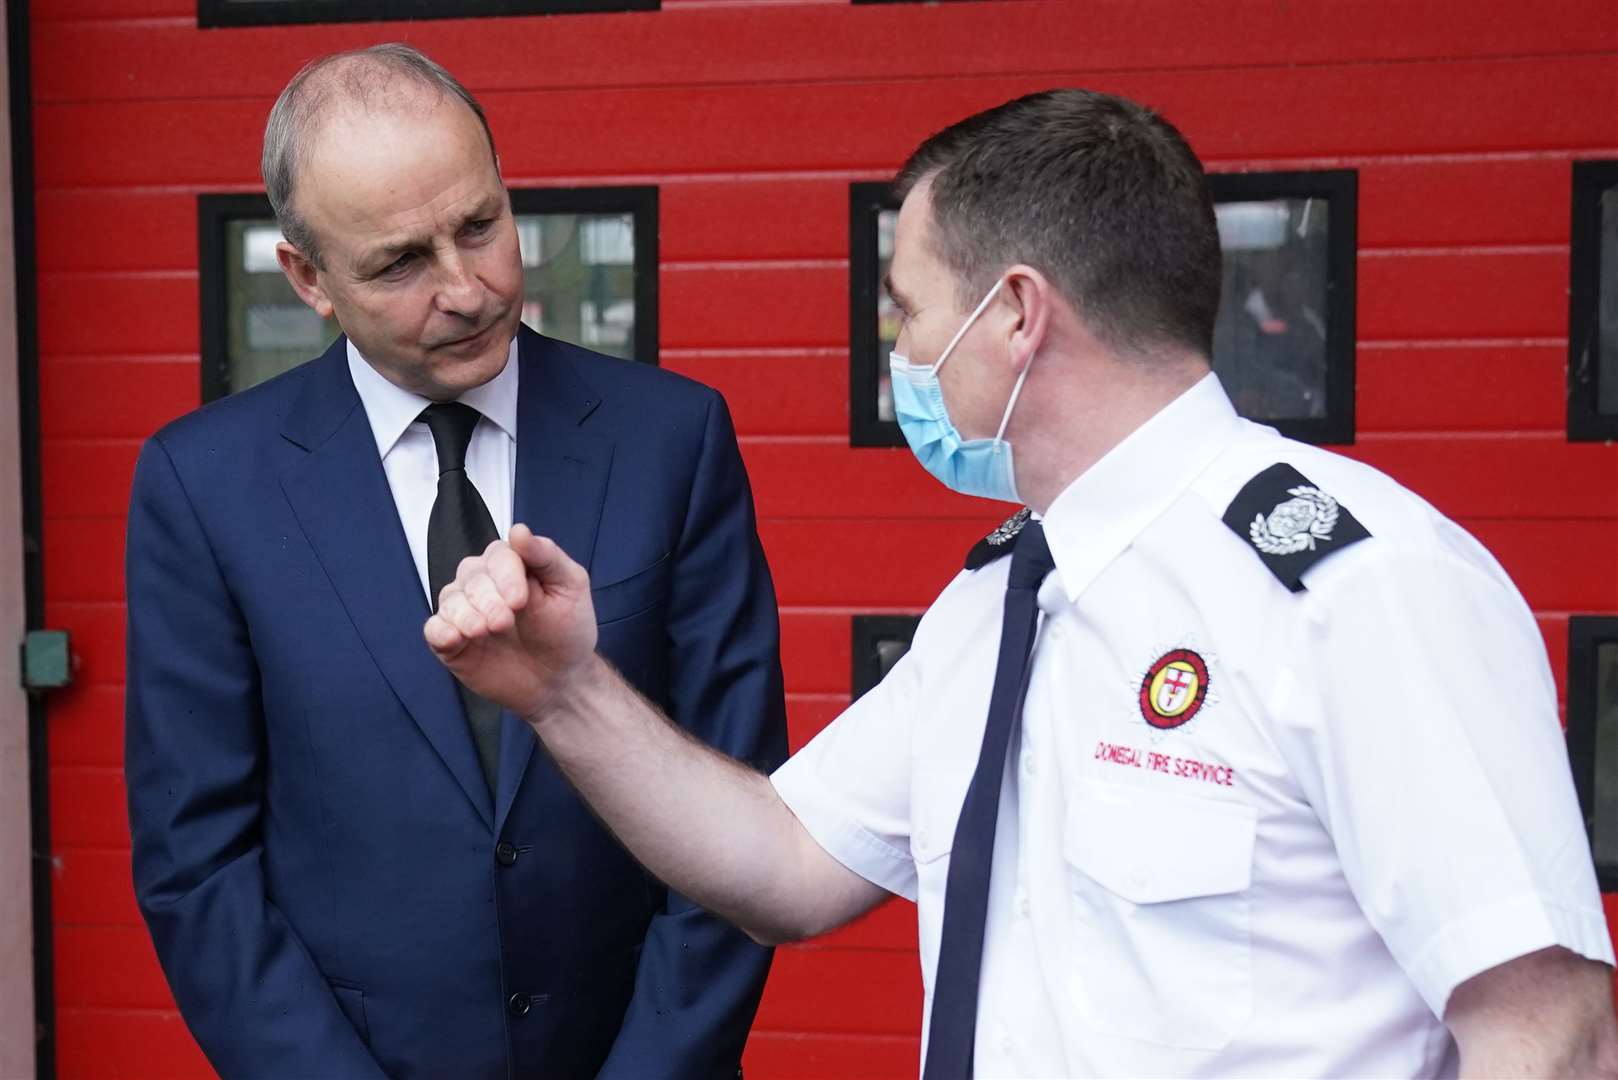 Taoiseach Micheal Martin meets firefighter Kevin Boylan at Letterkenny fire station (Brian Lawless/PA)